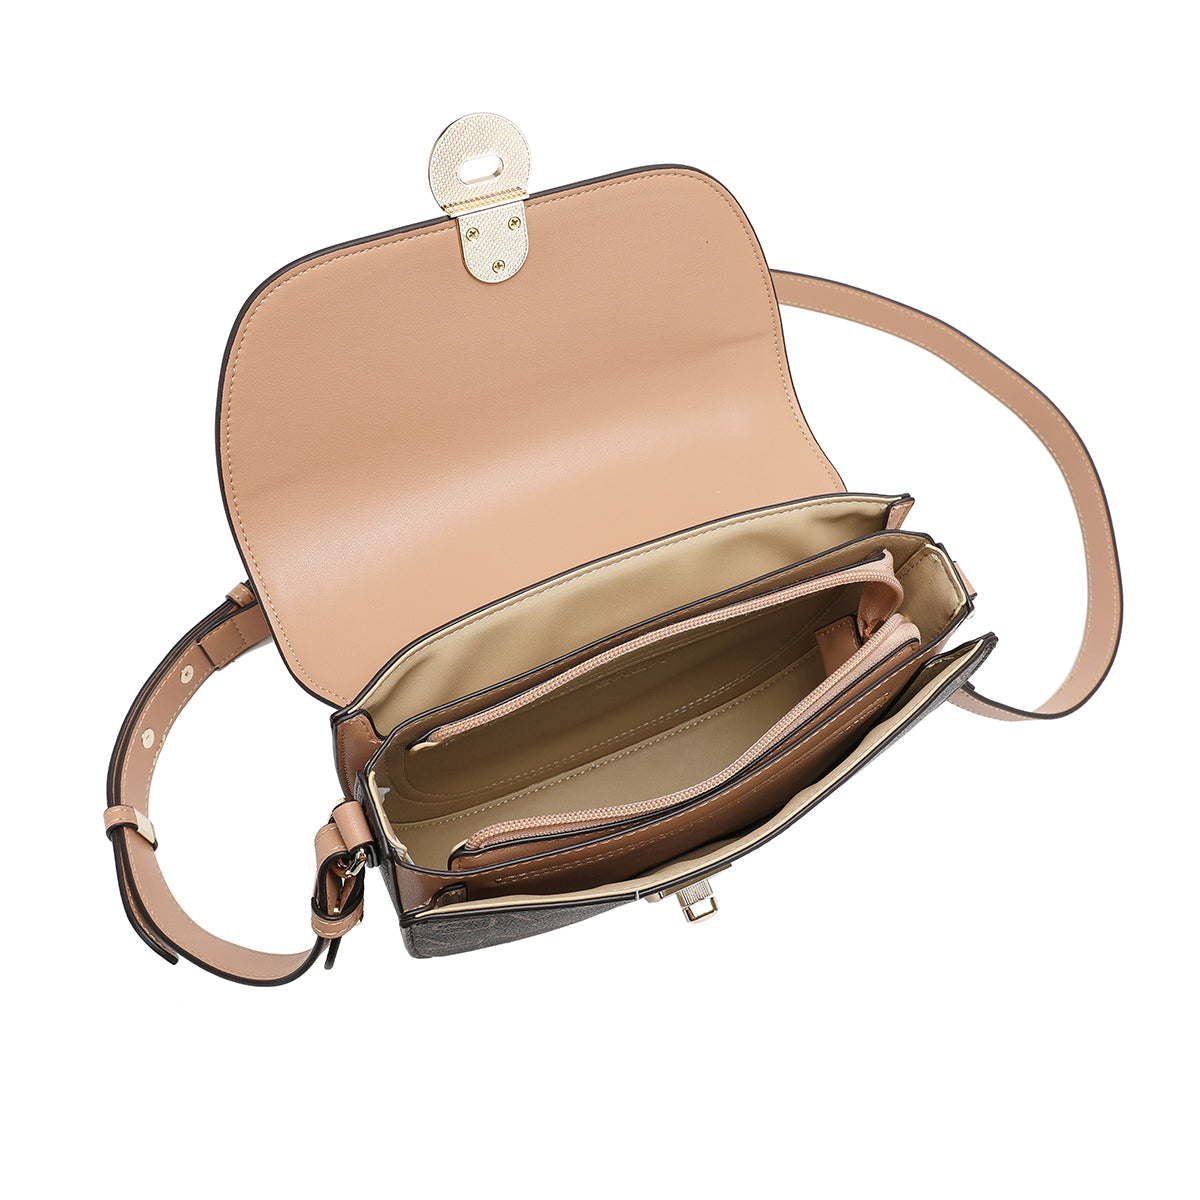 A distinctive and practical shoulder bag, 22 cm wide, in luxurious coffee brown